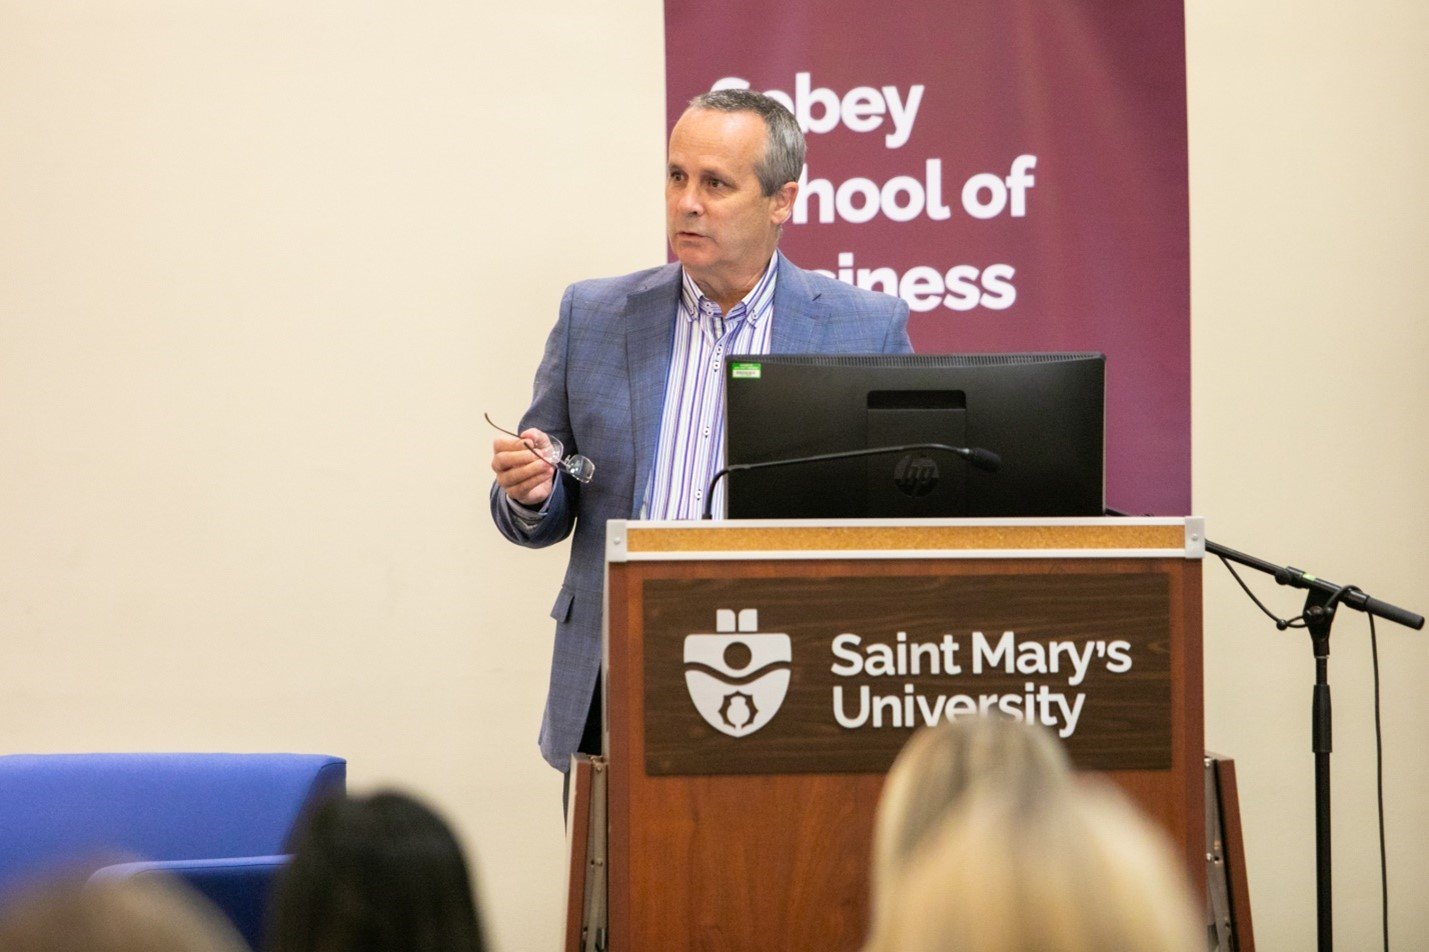  Dr. Mark Raymond, Interim Dean of the Sobey School of Business opening remarks for the Elevating Women in Business: Blazing Trails event.&nbsp;  